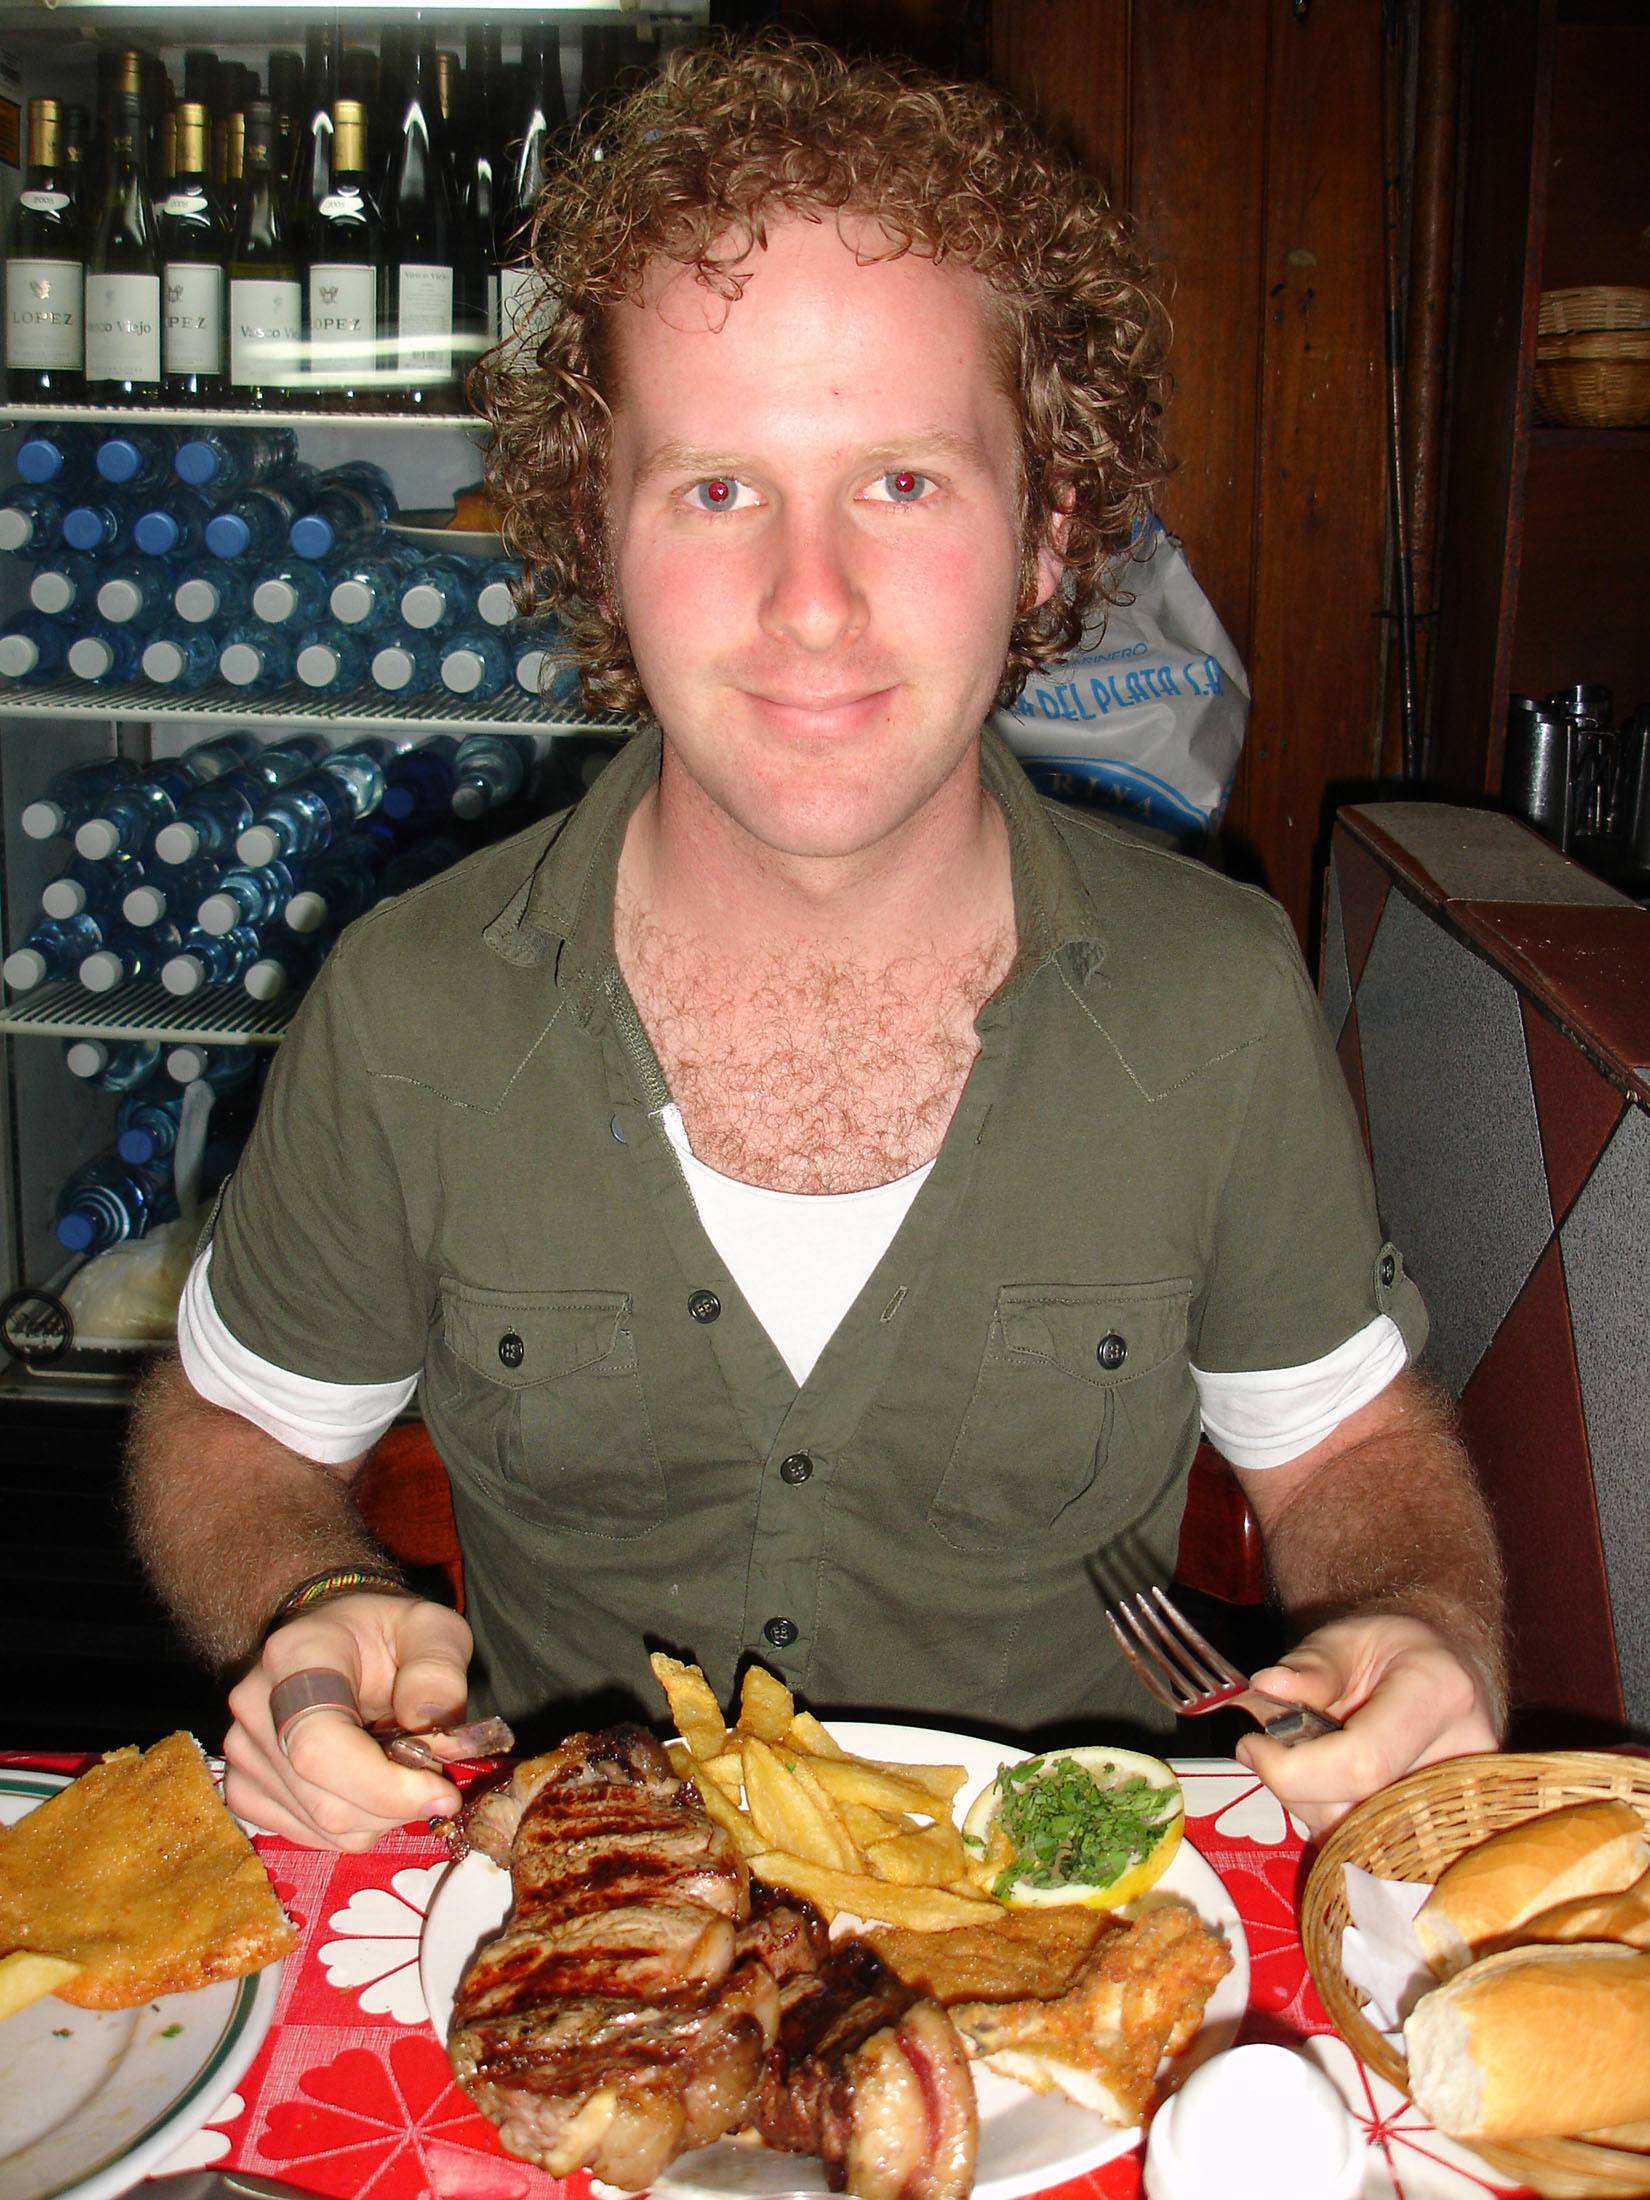 Ben eating a steak at a parrilla in Buenos Aires Argentina